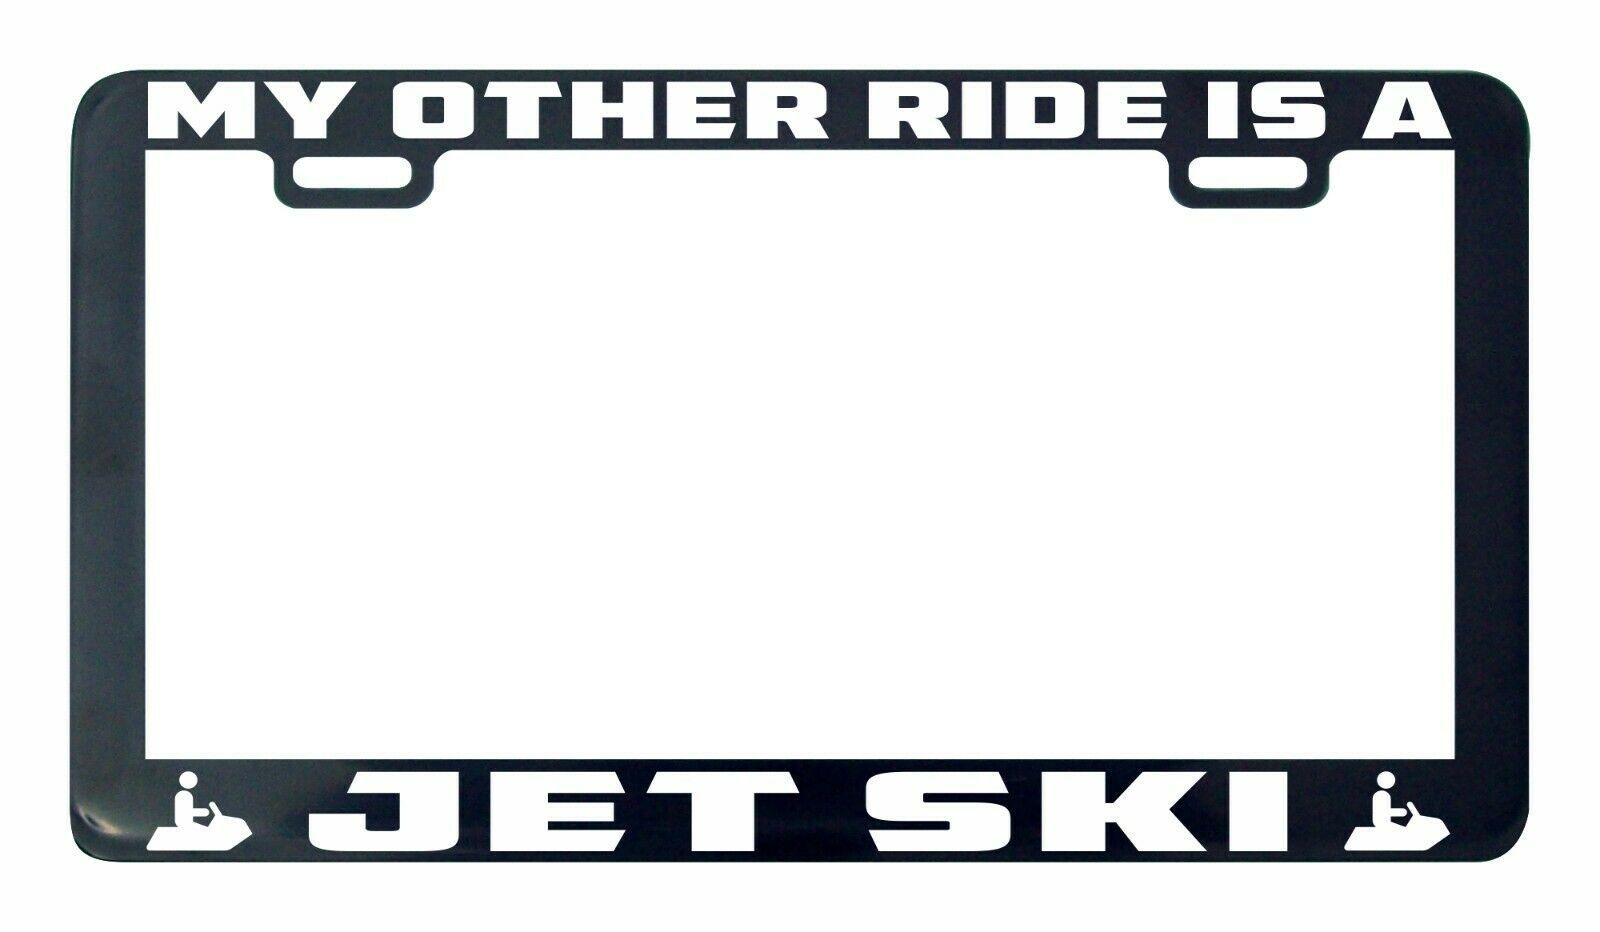 My other ride is a Jet Ski license plate frame holder tag - $5.99